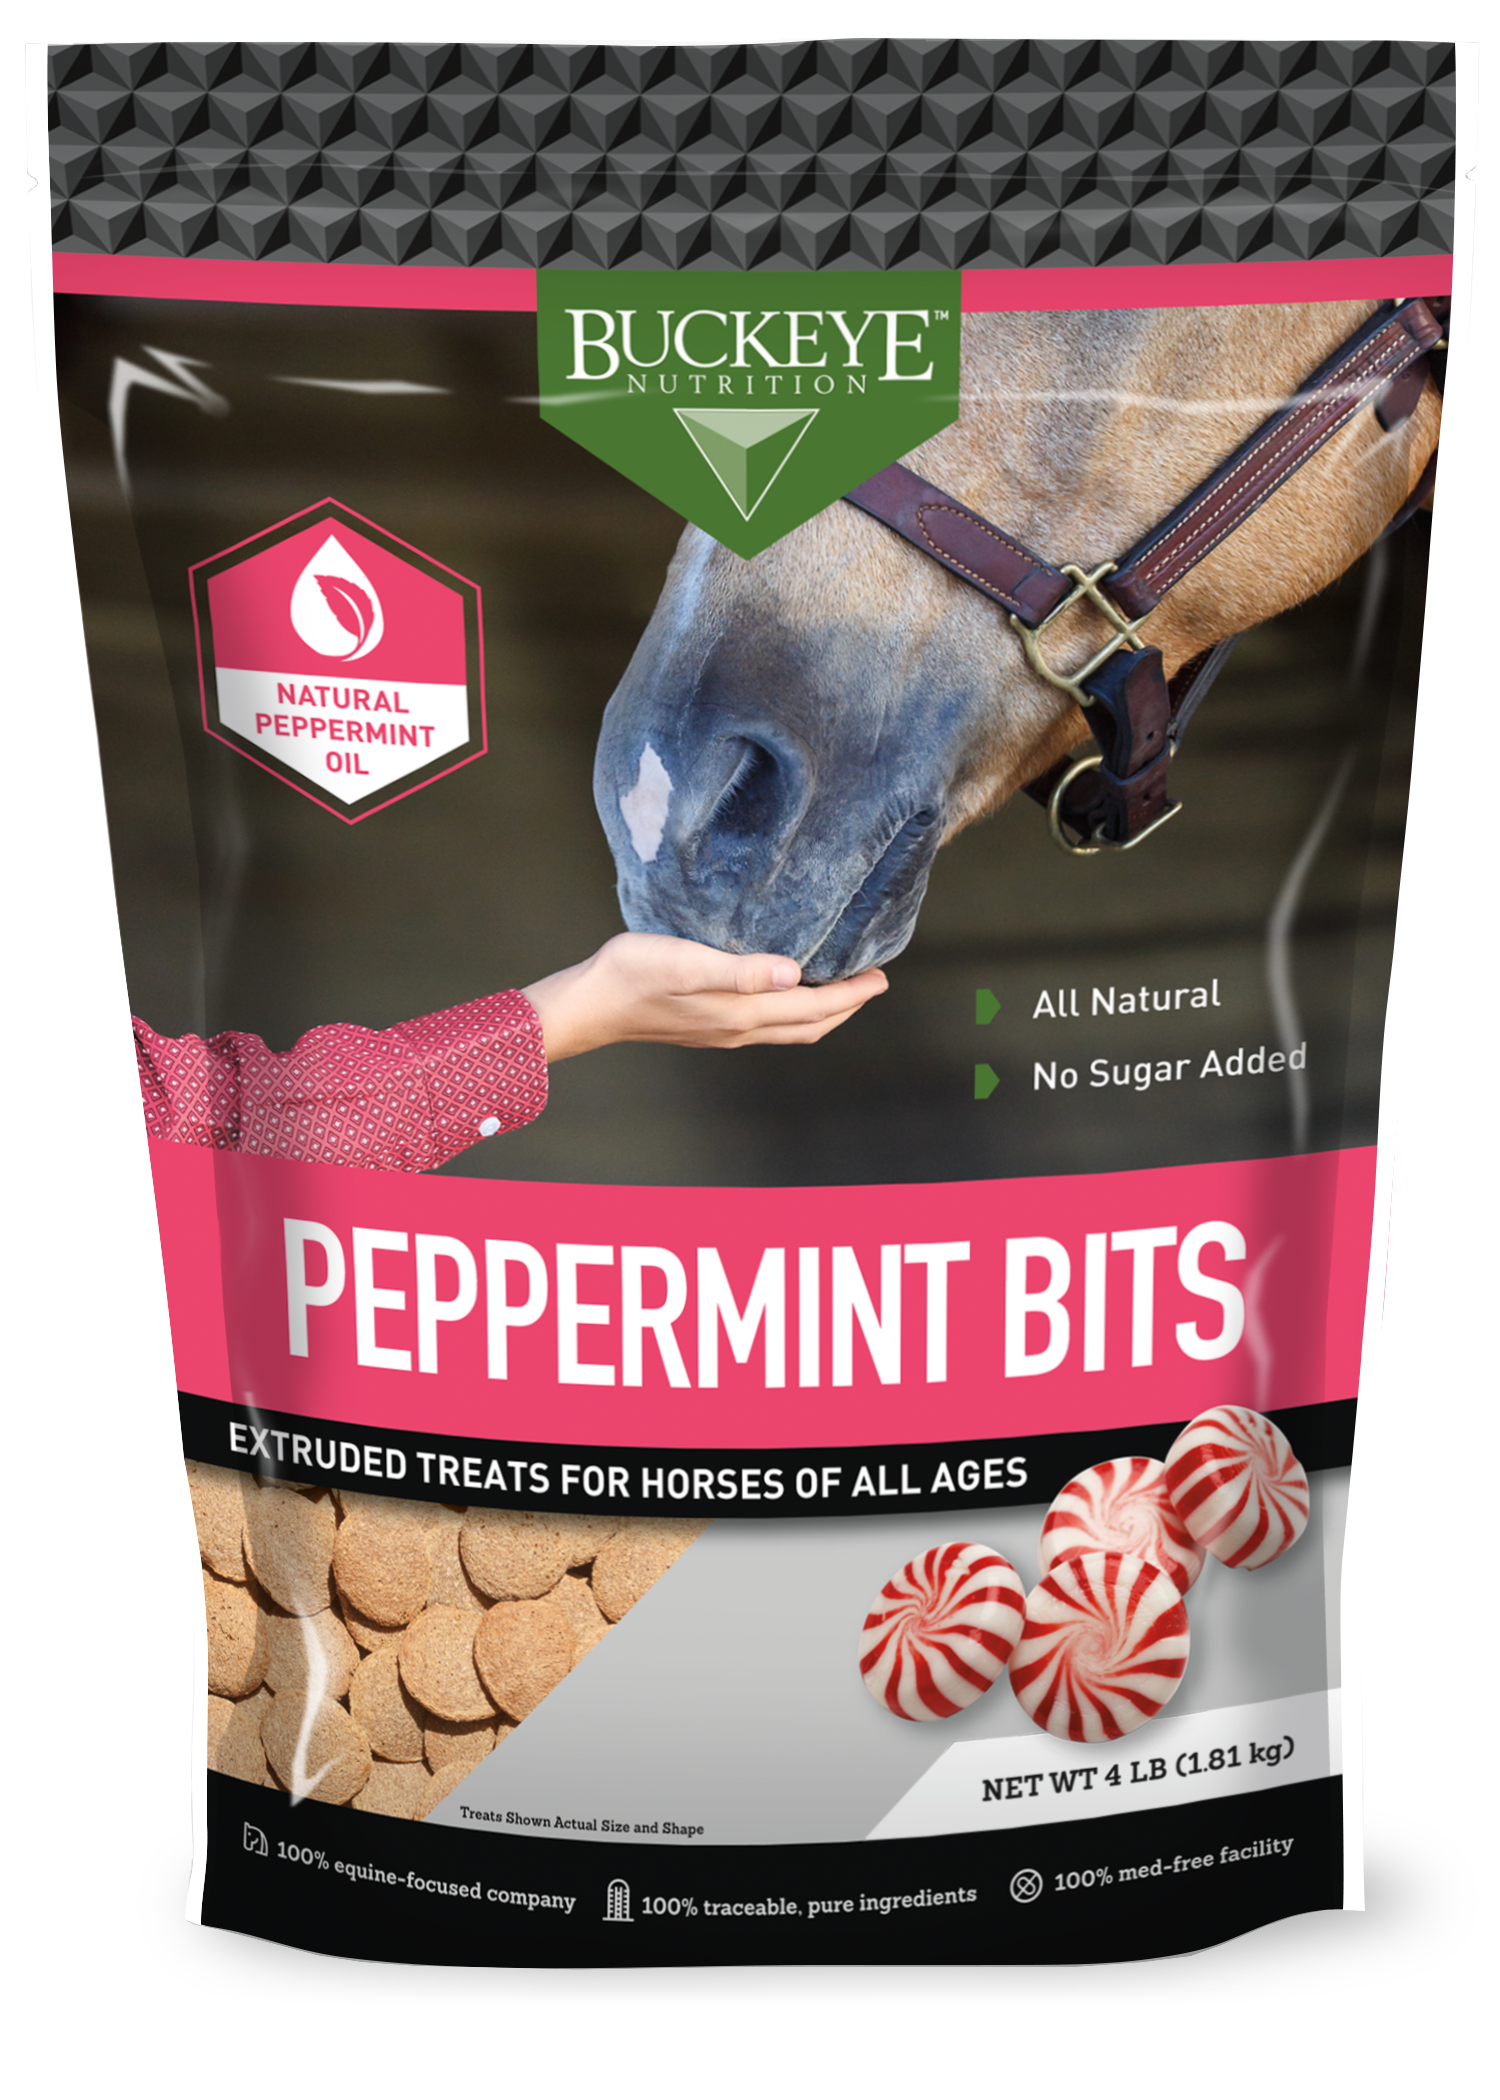 All Natural No Sugar Added Peppermint Bits Treats package